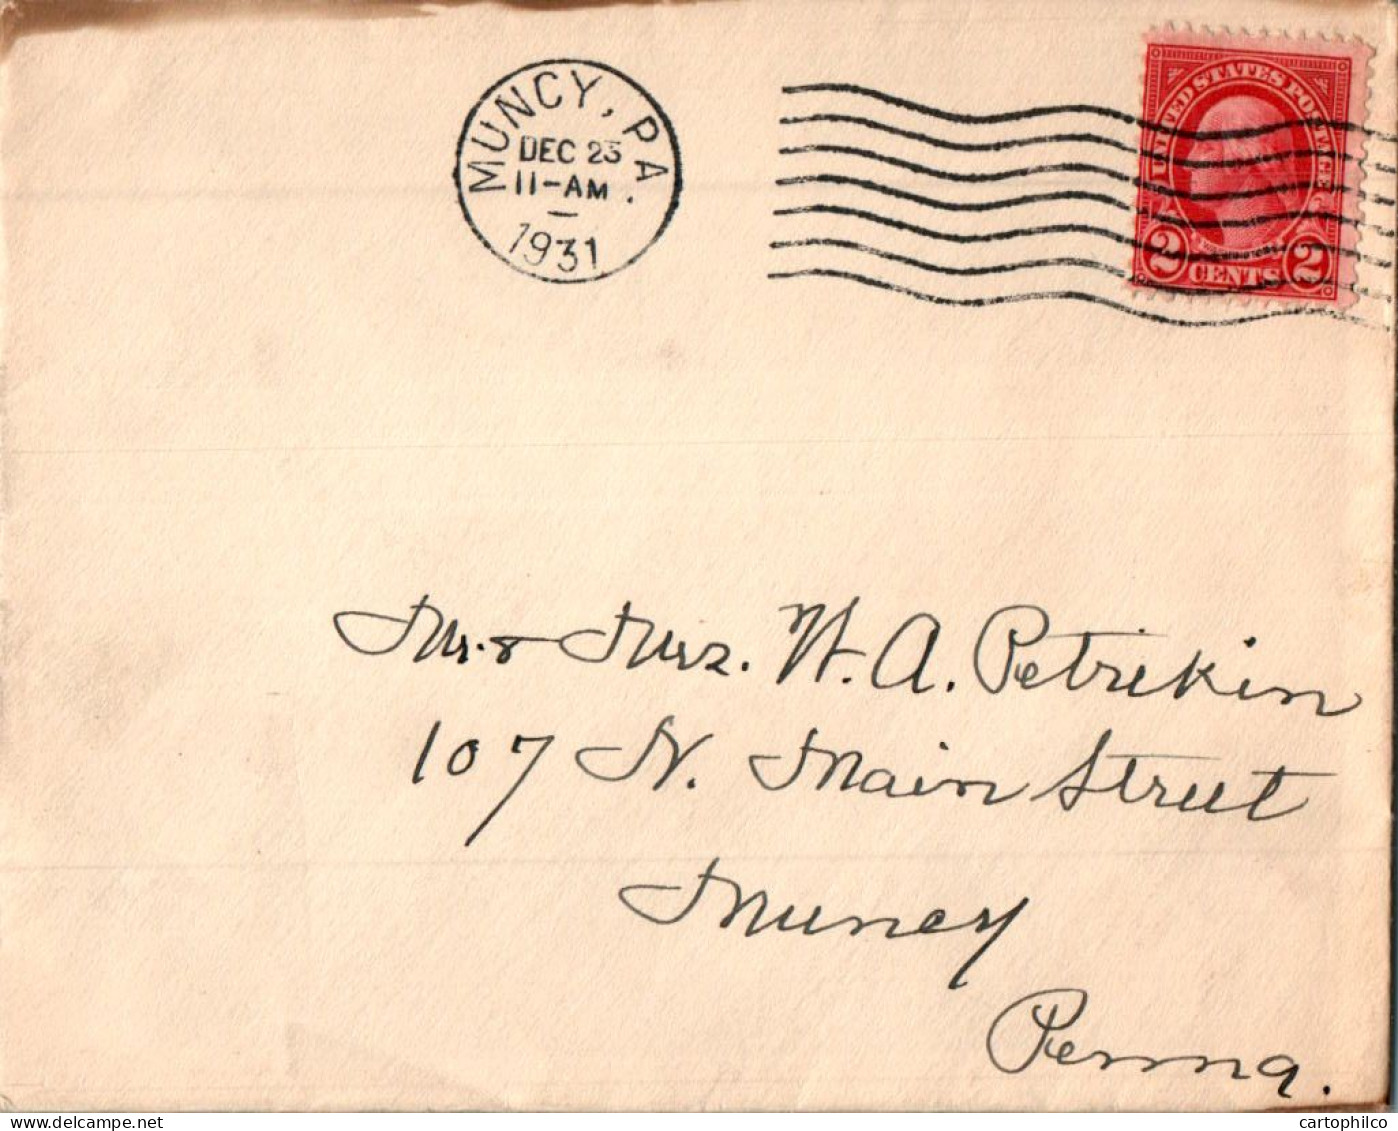 US Cover 2c Muncy Pa 1931 For Pa - Covers & Documents